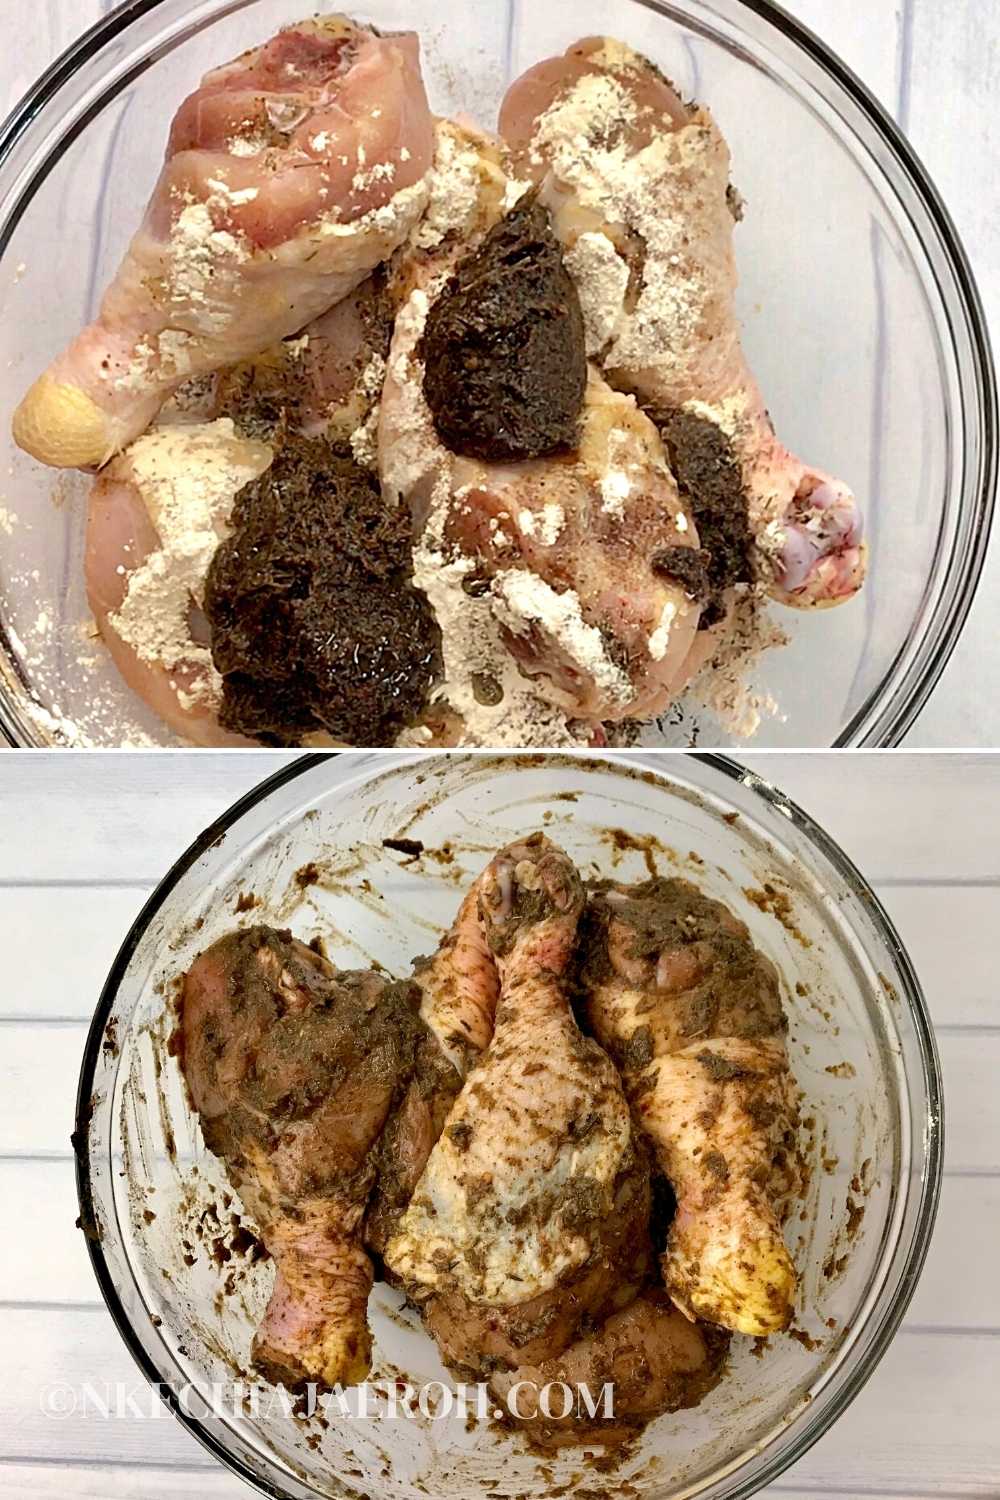 Add all the ingredients to the chicken. Then while wearing gloves, use your hands to combine. Allow chicken to marinate for up to 2 days or air fry immediately.